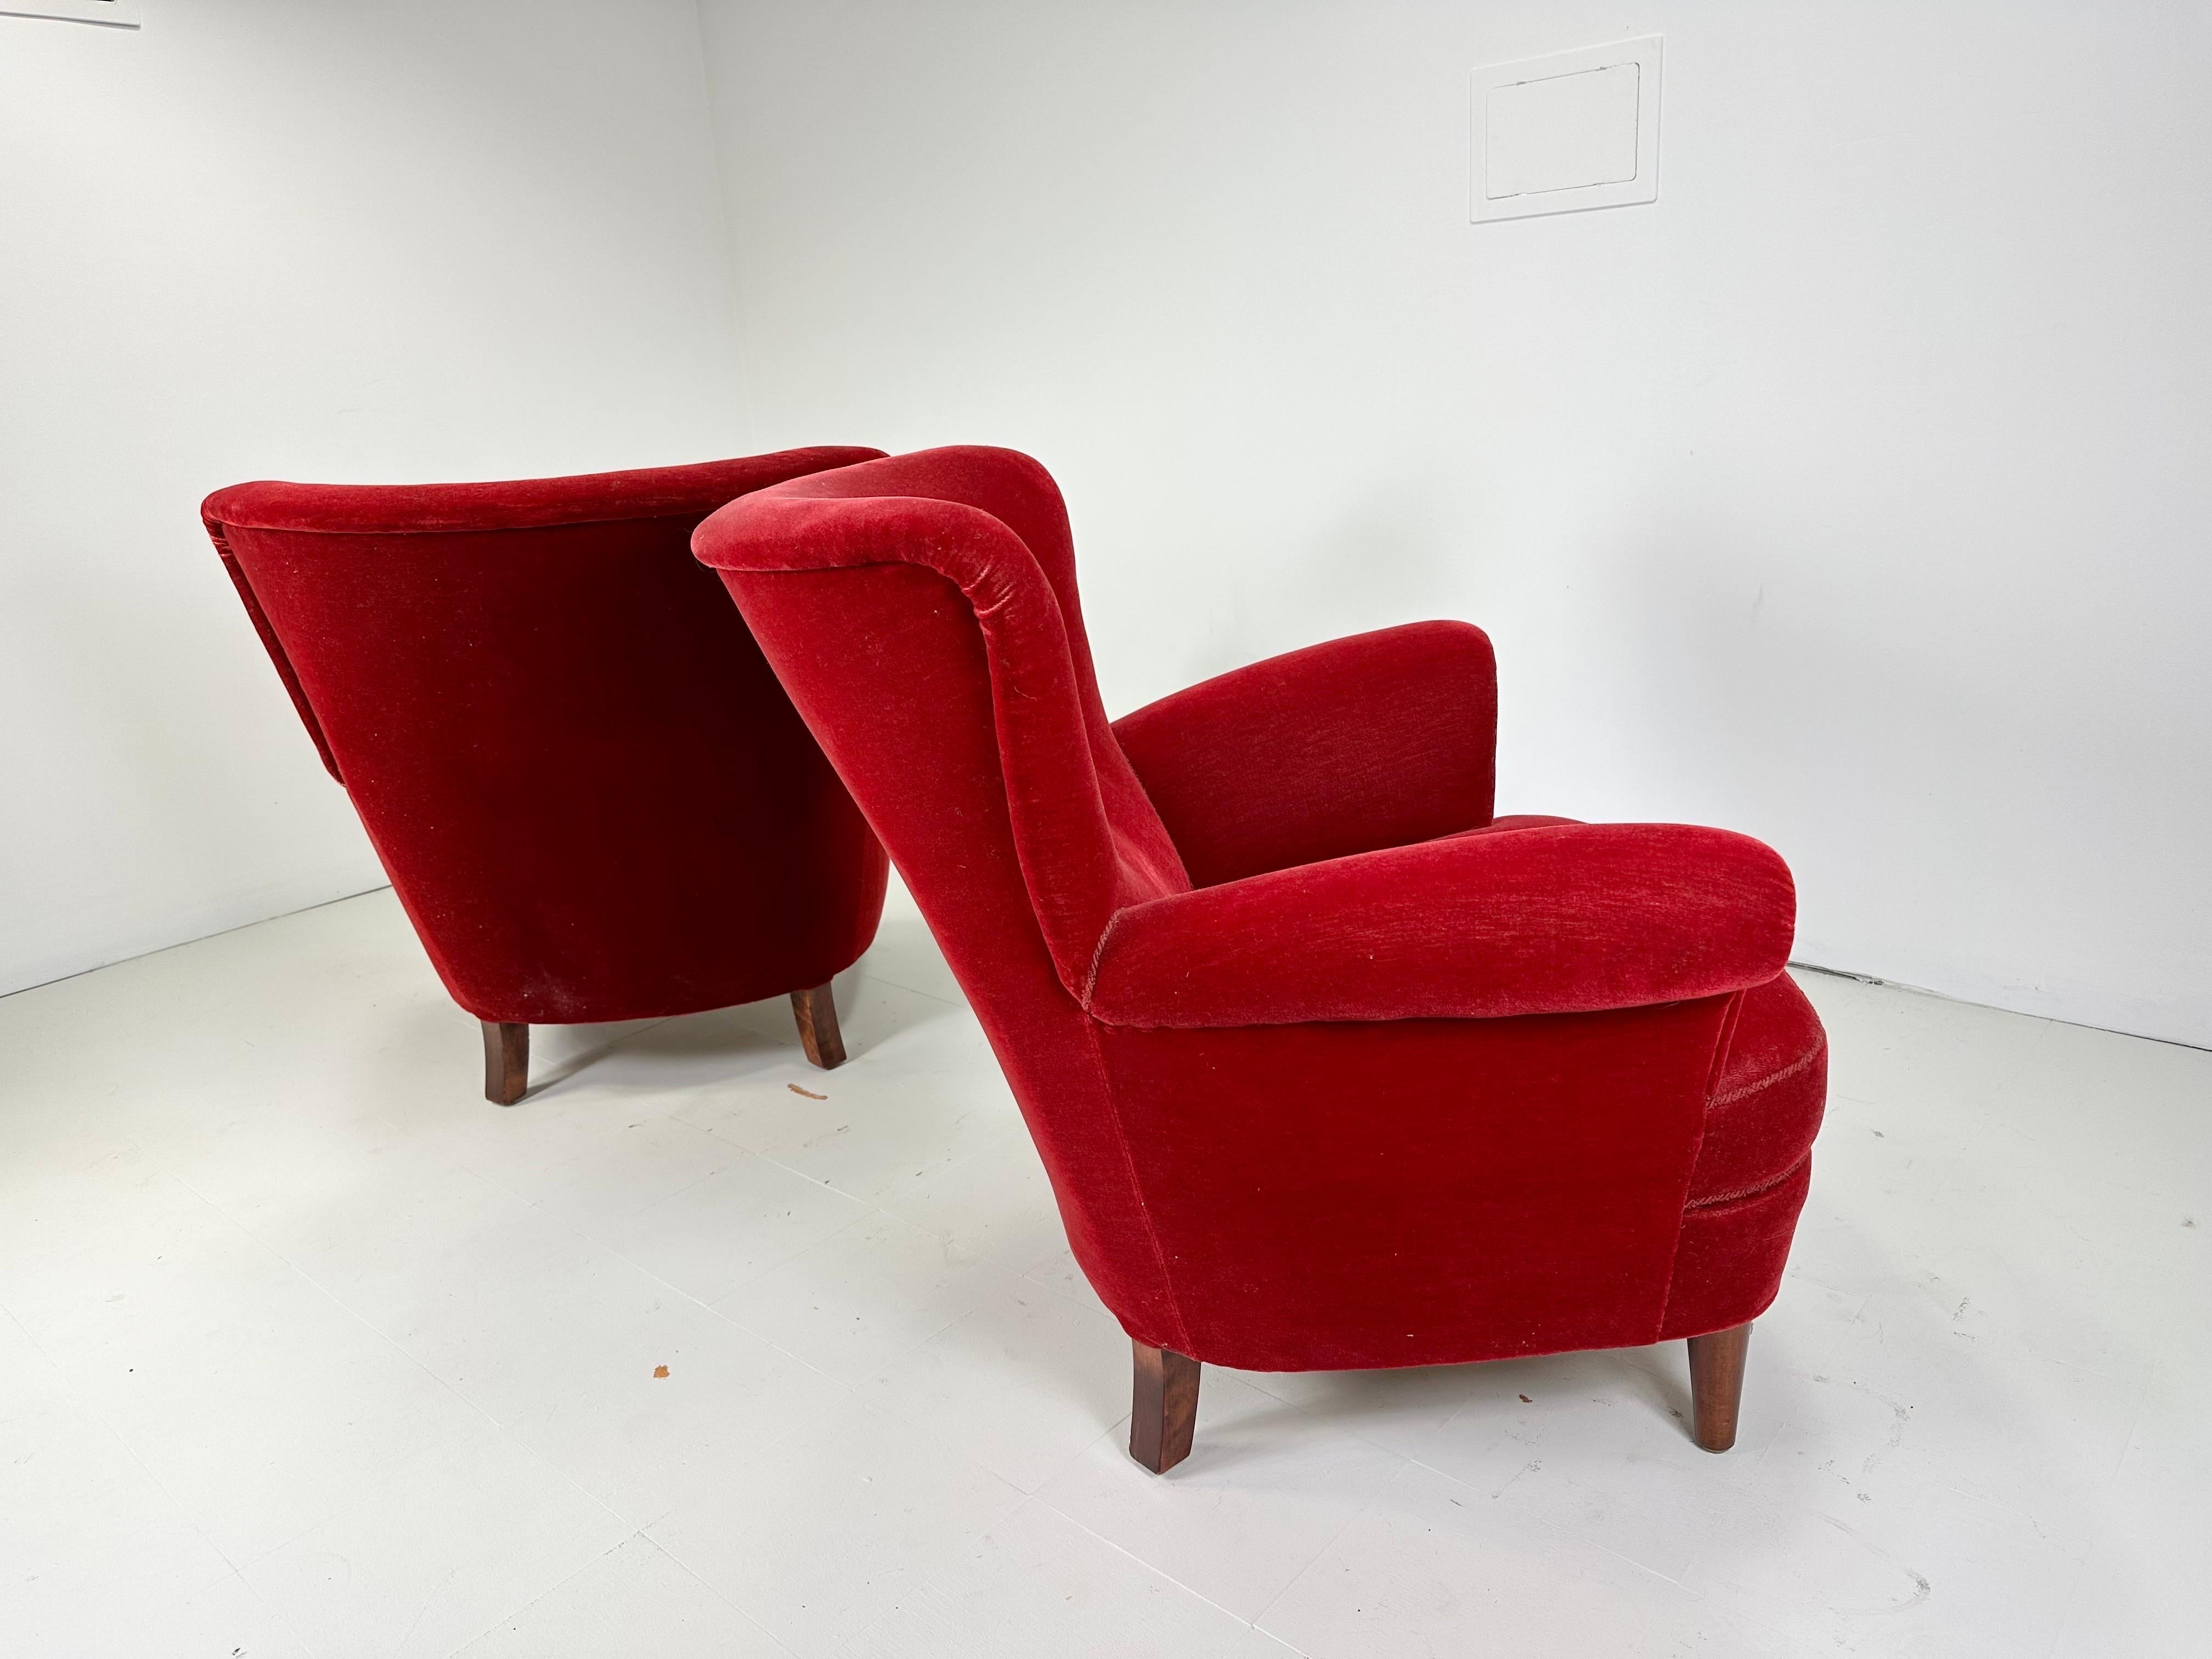 Pair of 1940’s Red Velvet Danish Lounge Chairs  In Good Condition For Sale In Turners Falls, MA